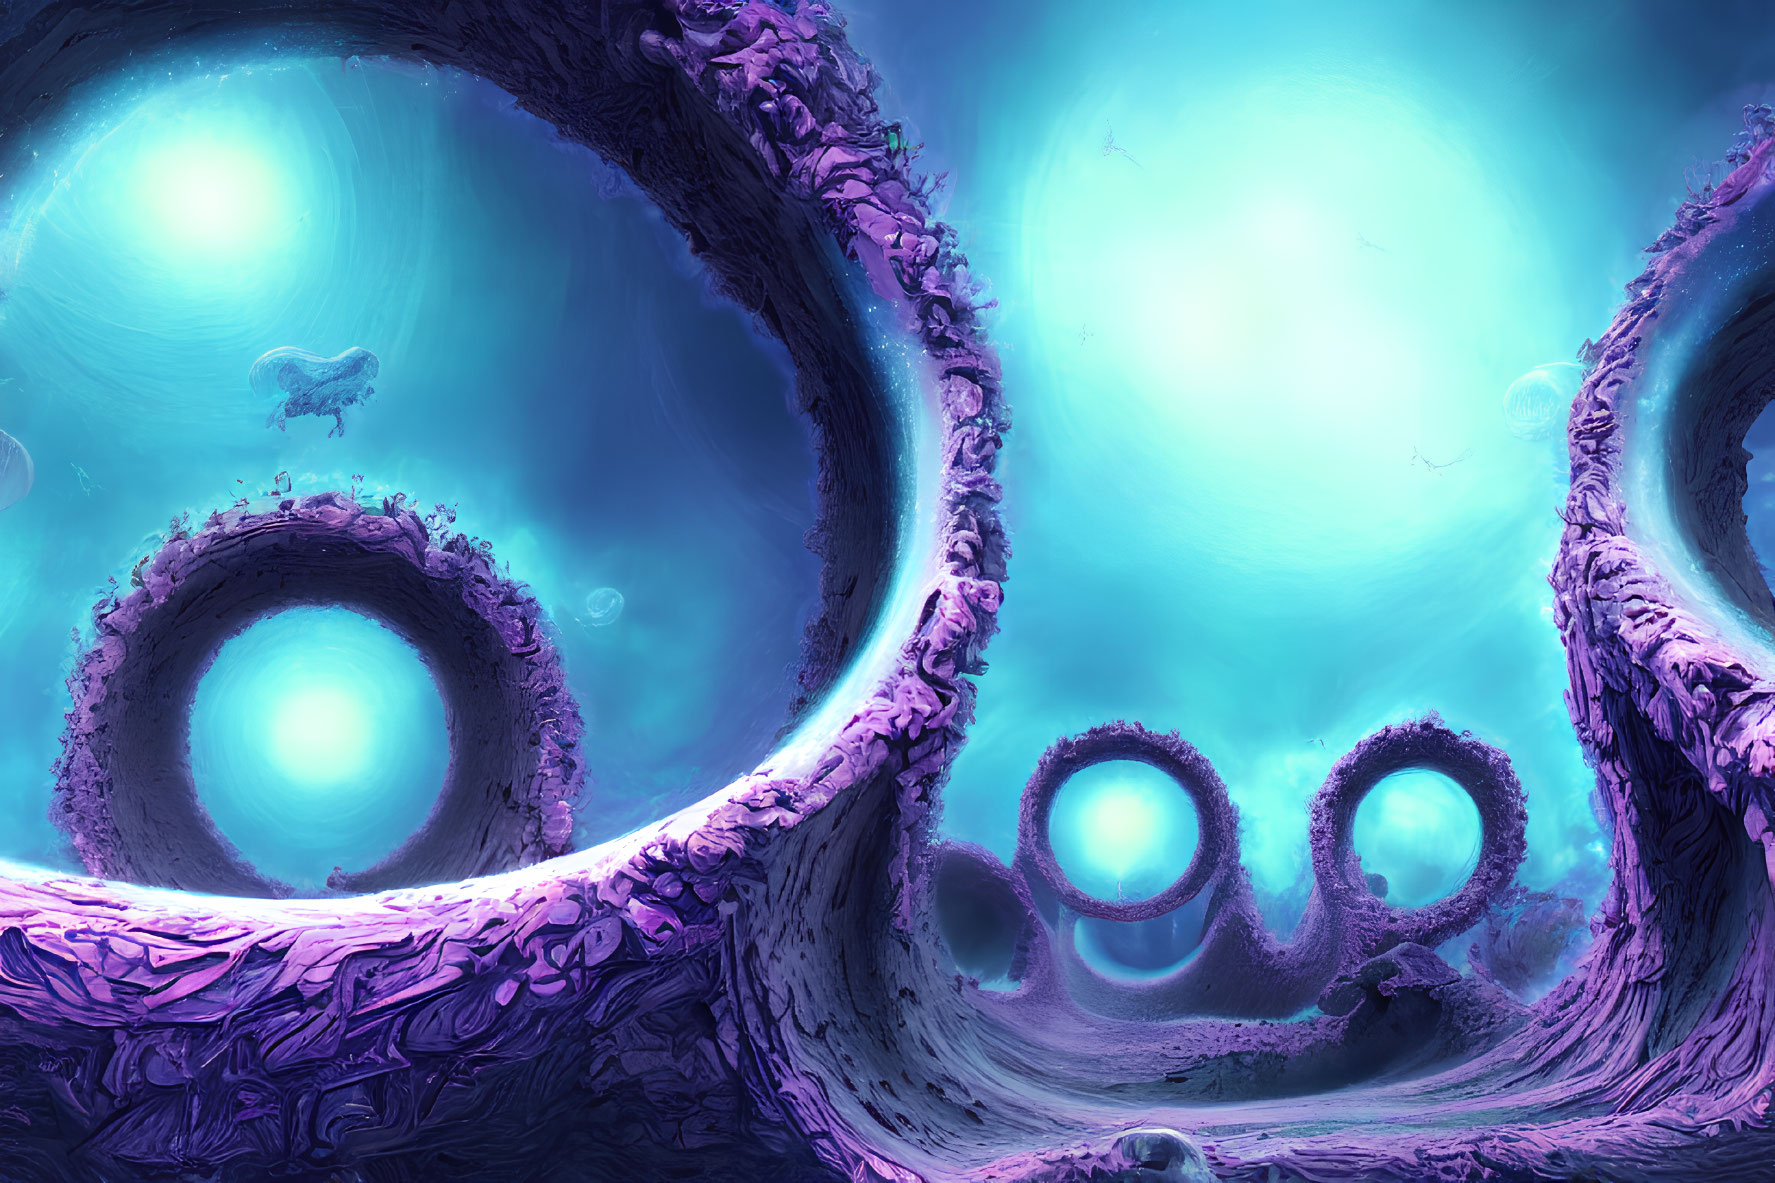 Surreal fractal landscape with swirling purple structures and glowing blue orbs